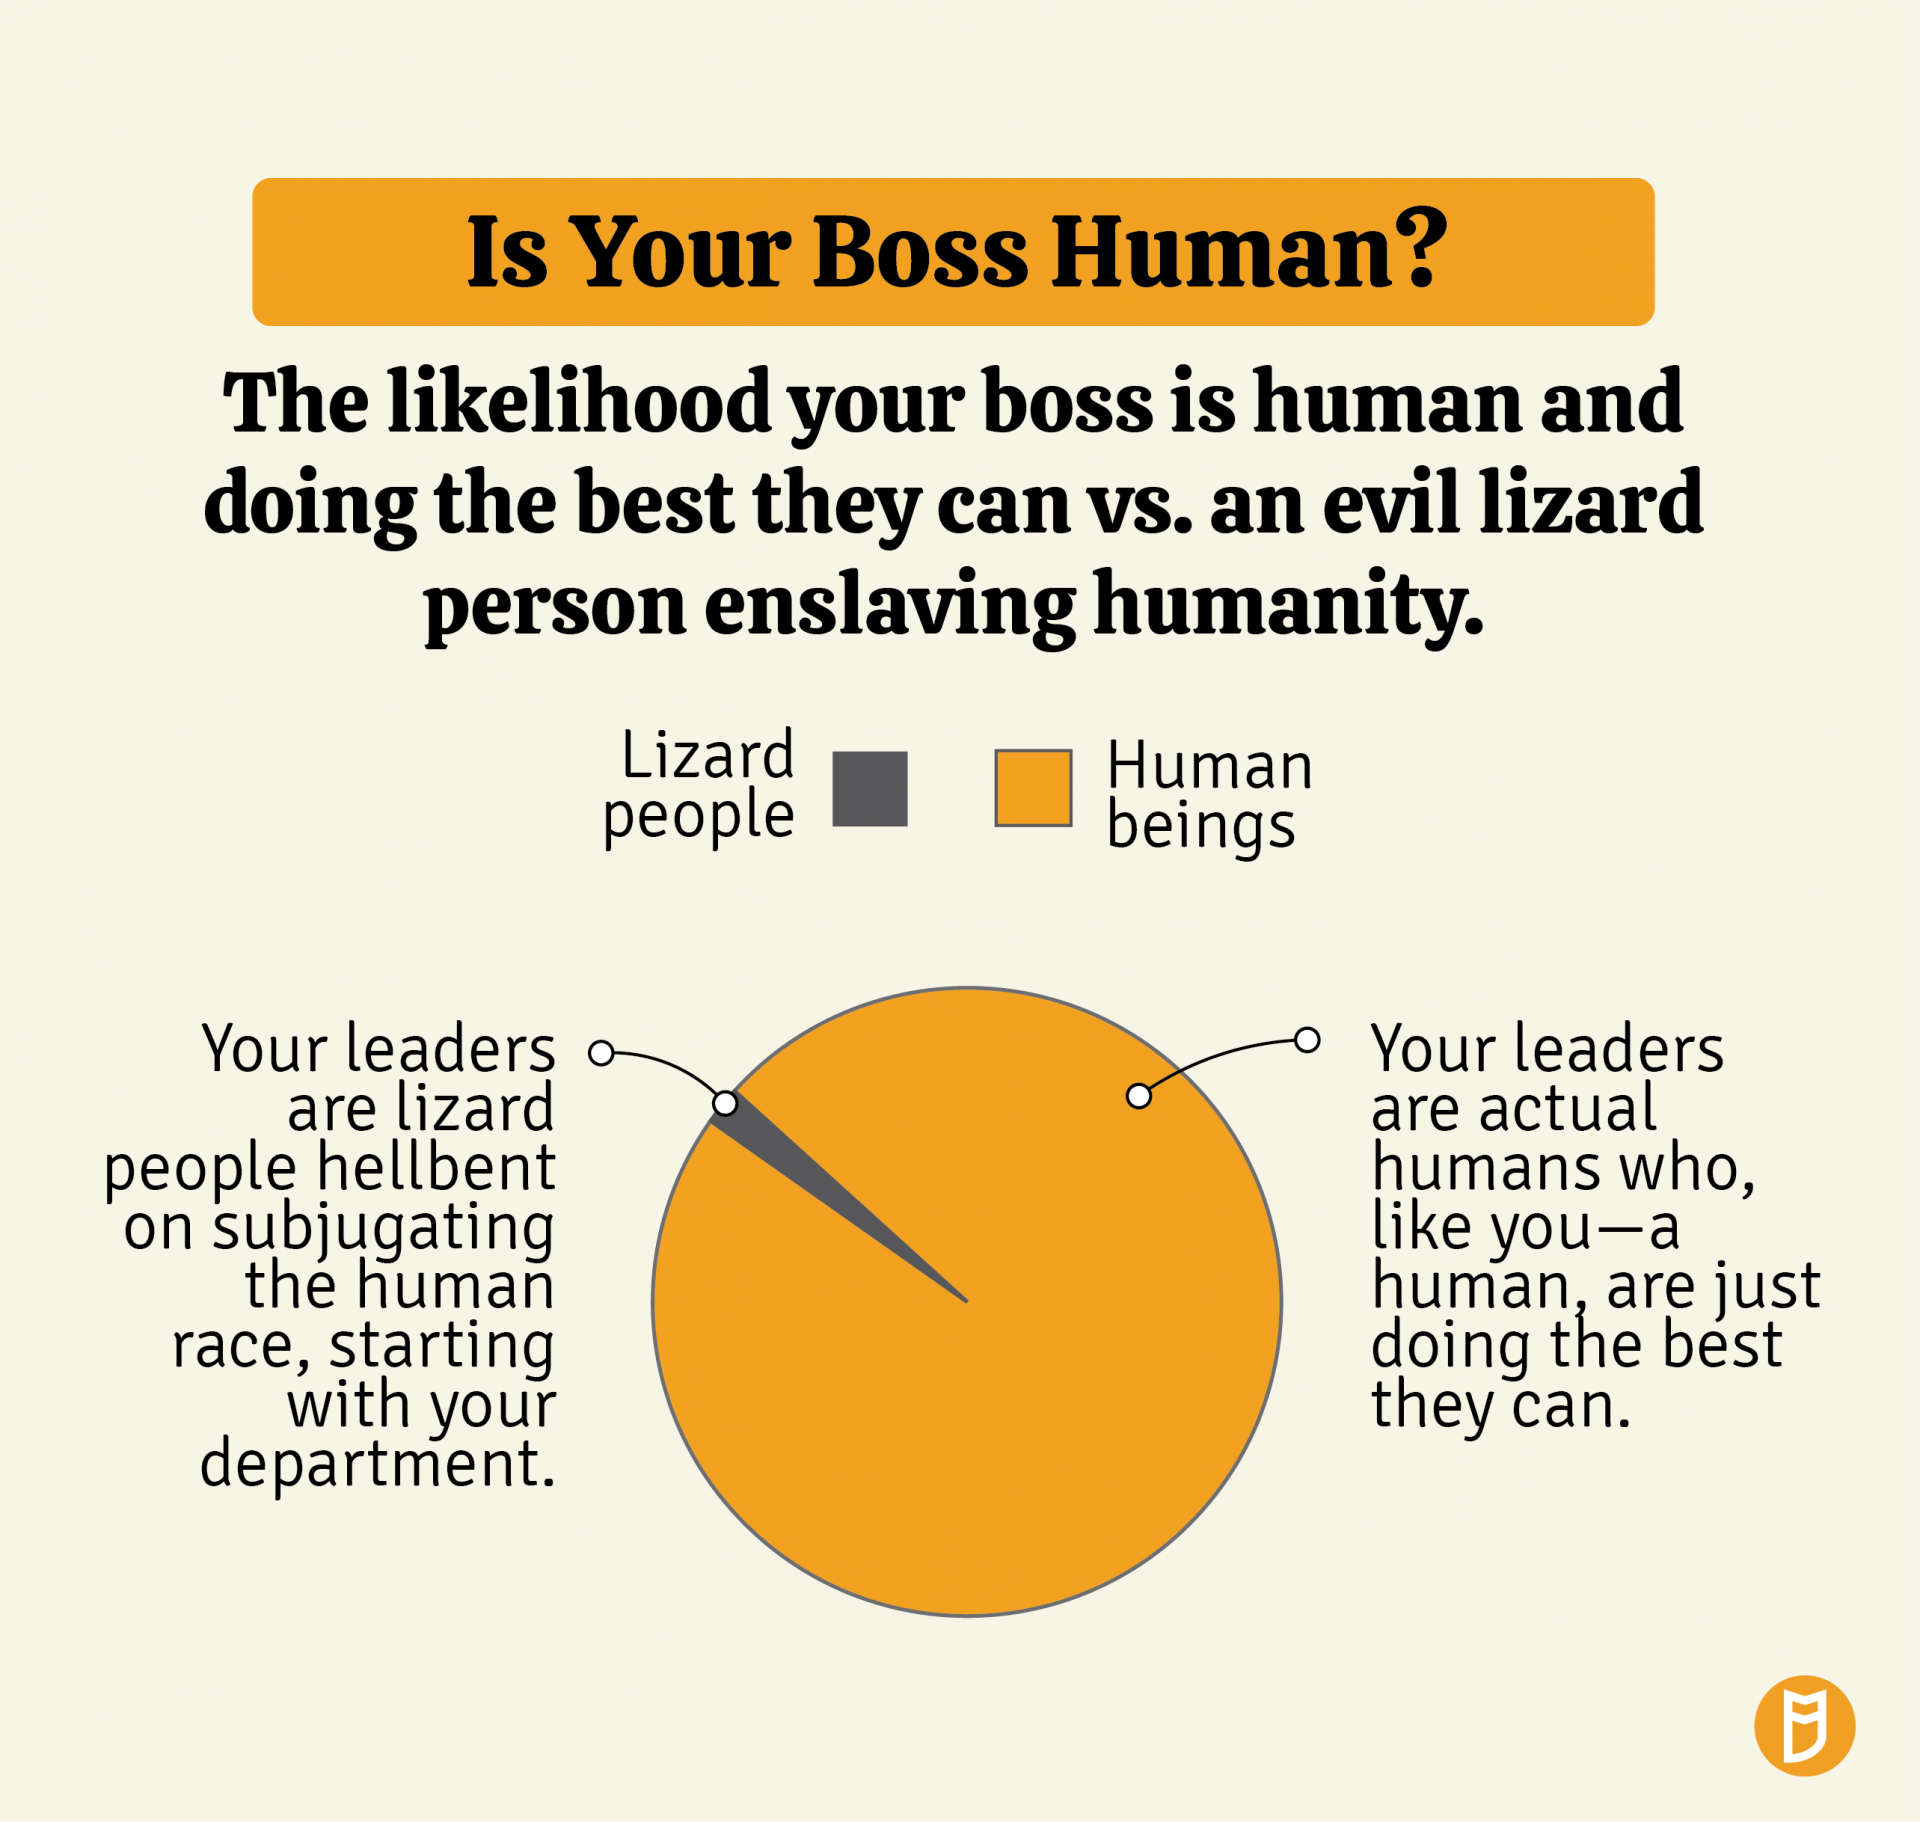 A graphic showing the likelihood your boss is an evil lizard person vs. a regular human doing the best they can. The point we're making is bosses are human, like you, so extend a little grace. Also, lizard people aren't real.